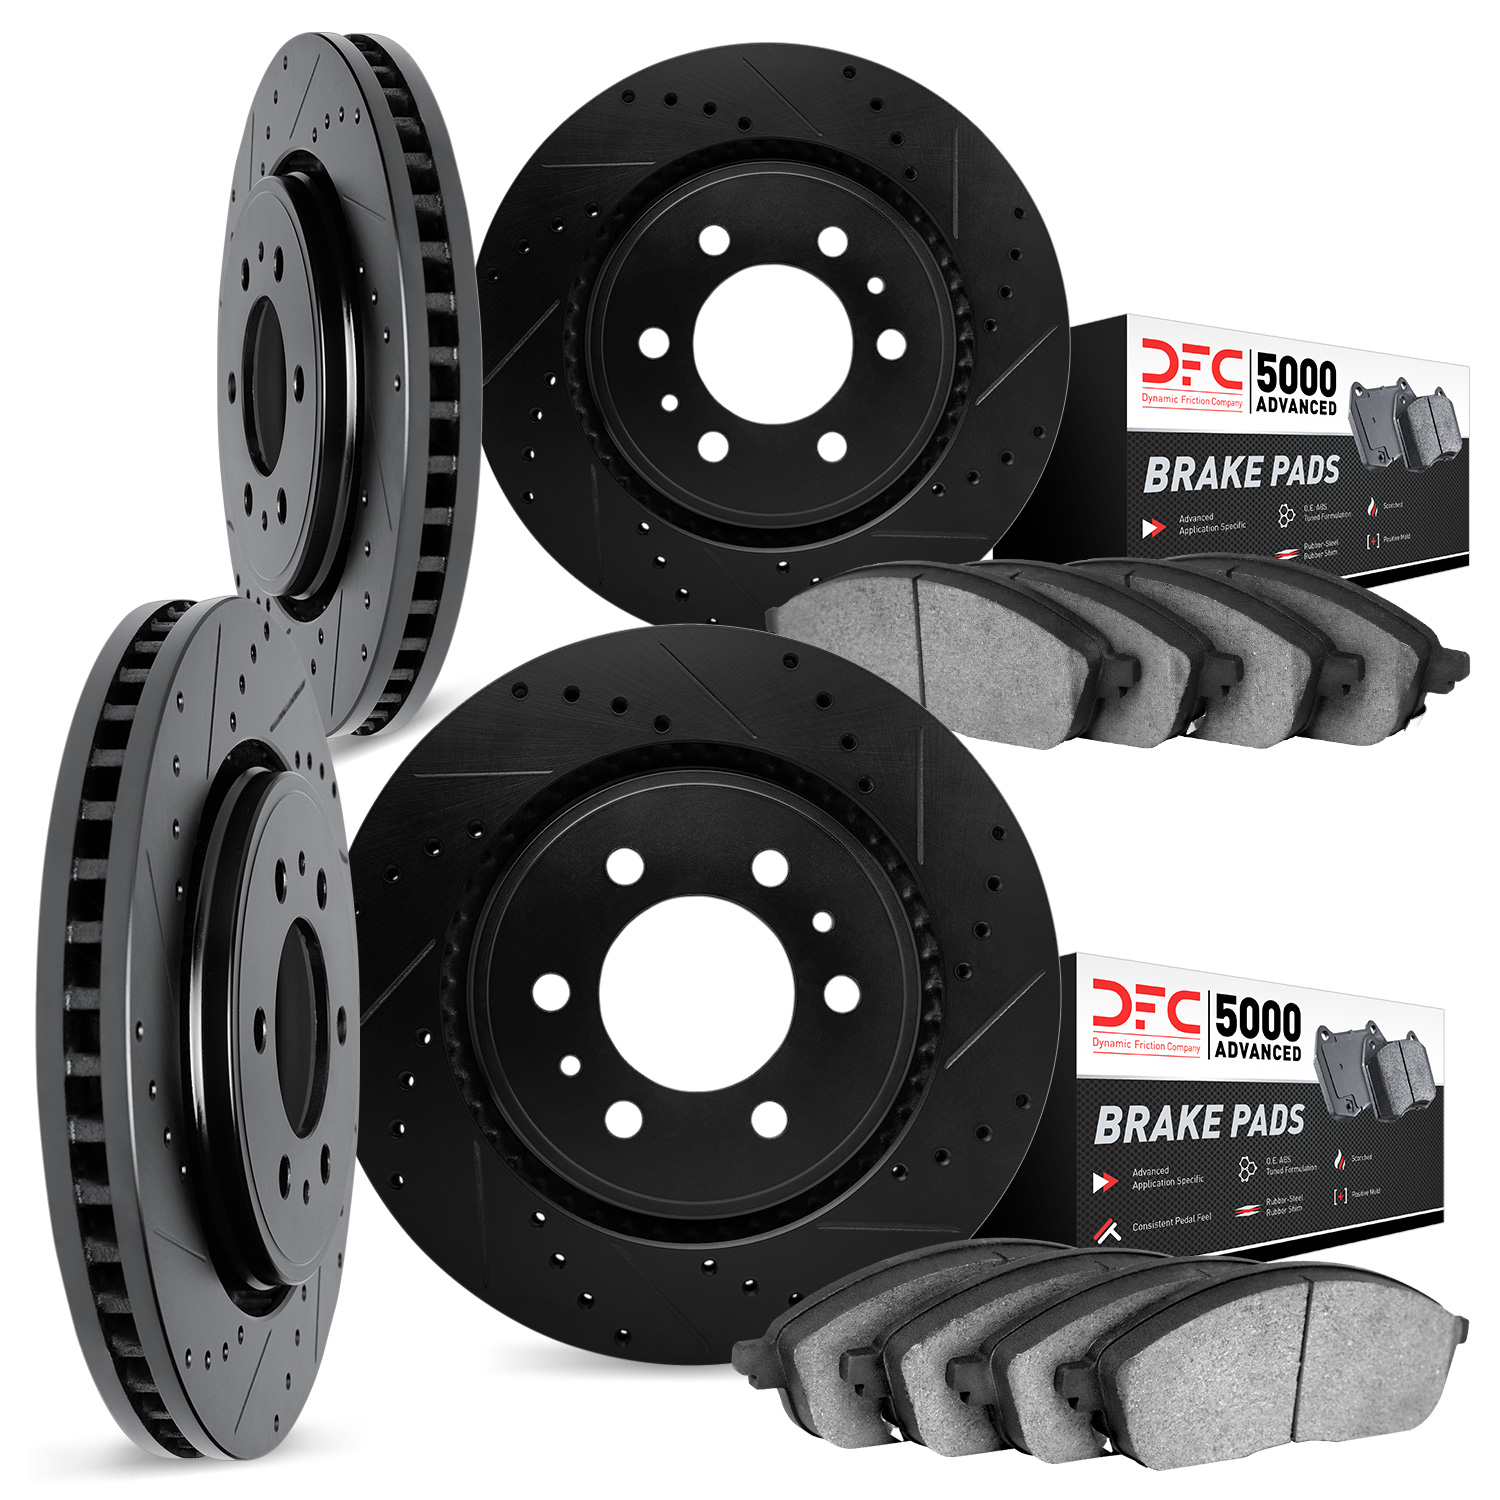 8504-48020 Drilled/Slotted Brake Rotors w/5000 Advanced Brake Pads Kit [Black], 2000-2006 GM, Position: Front and Rear